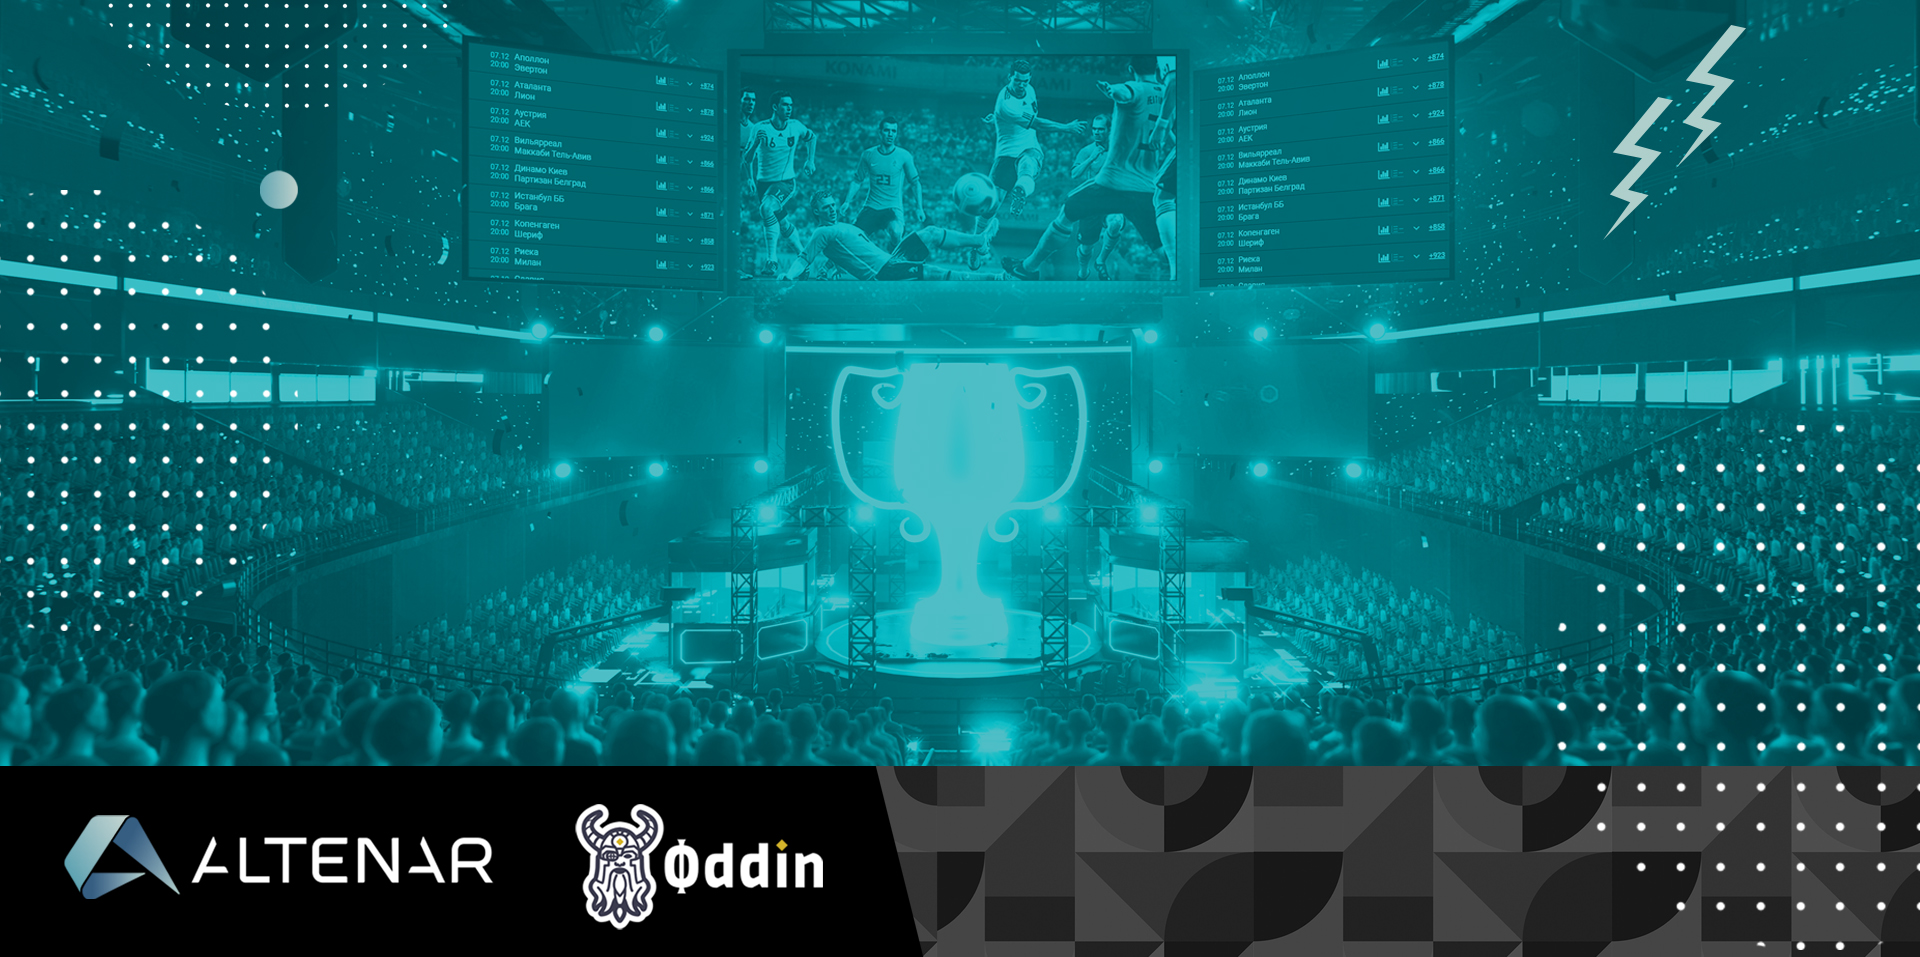 Altenar to integrate new esports odds feed from Oddin